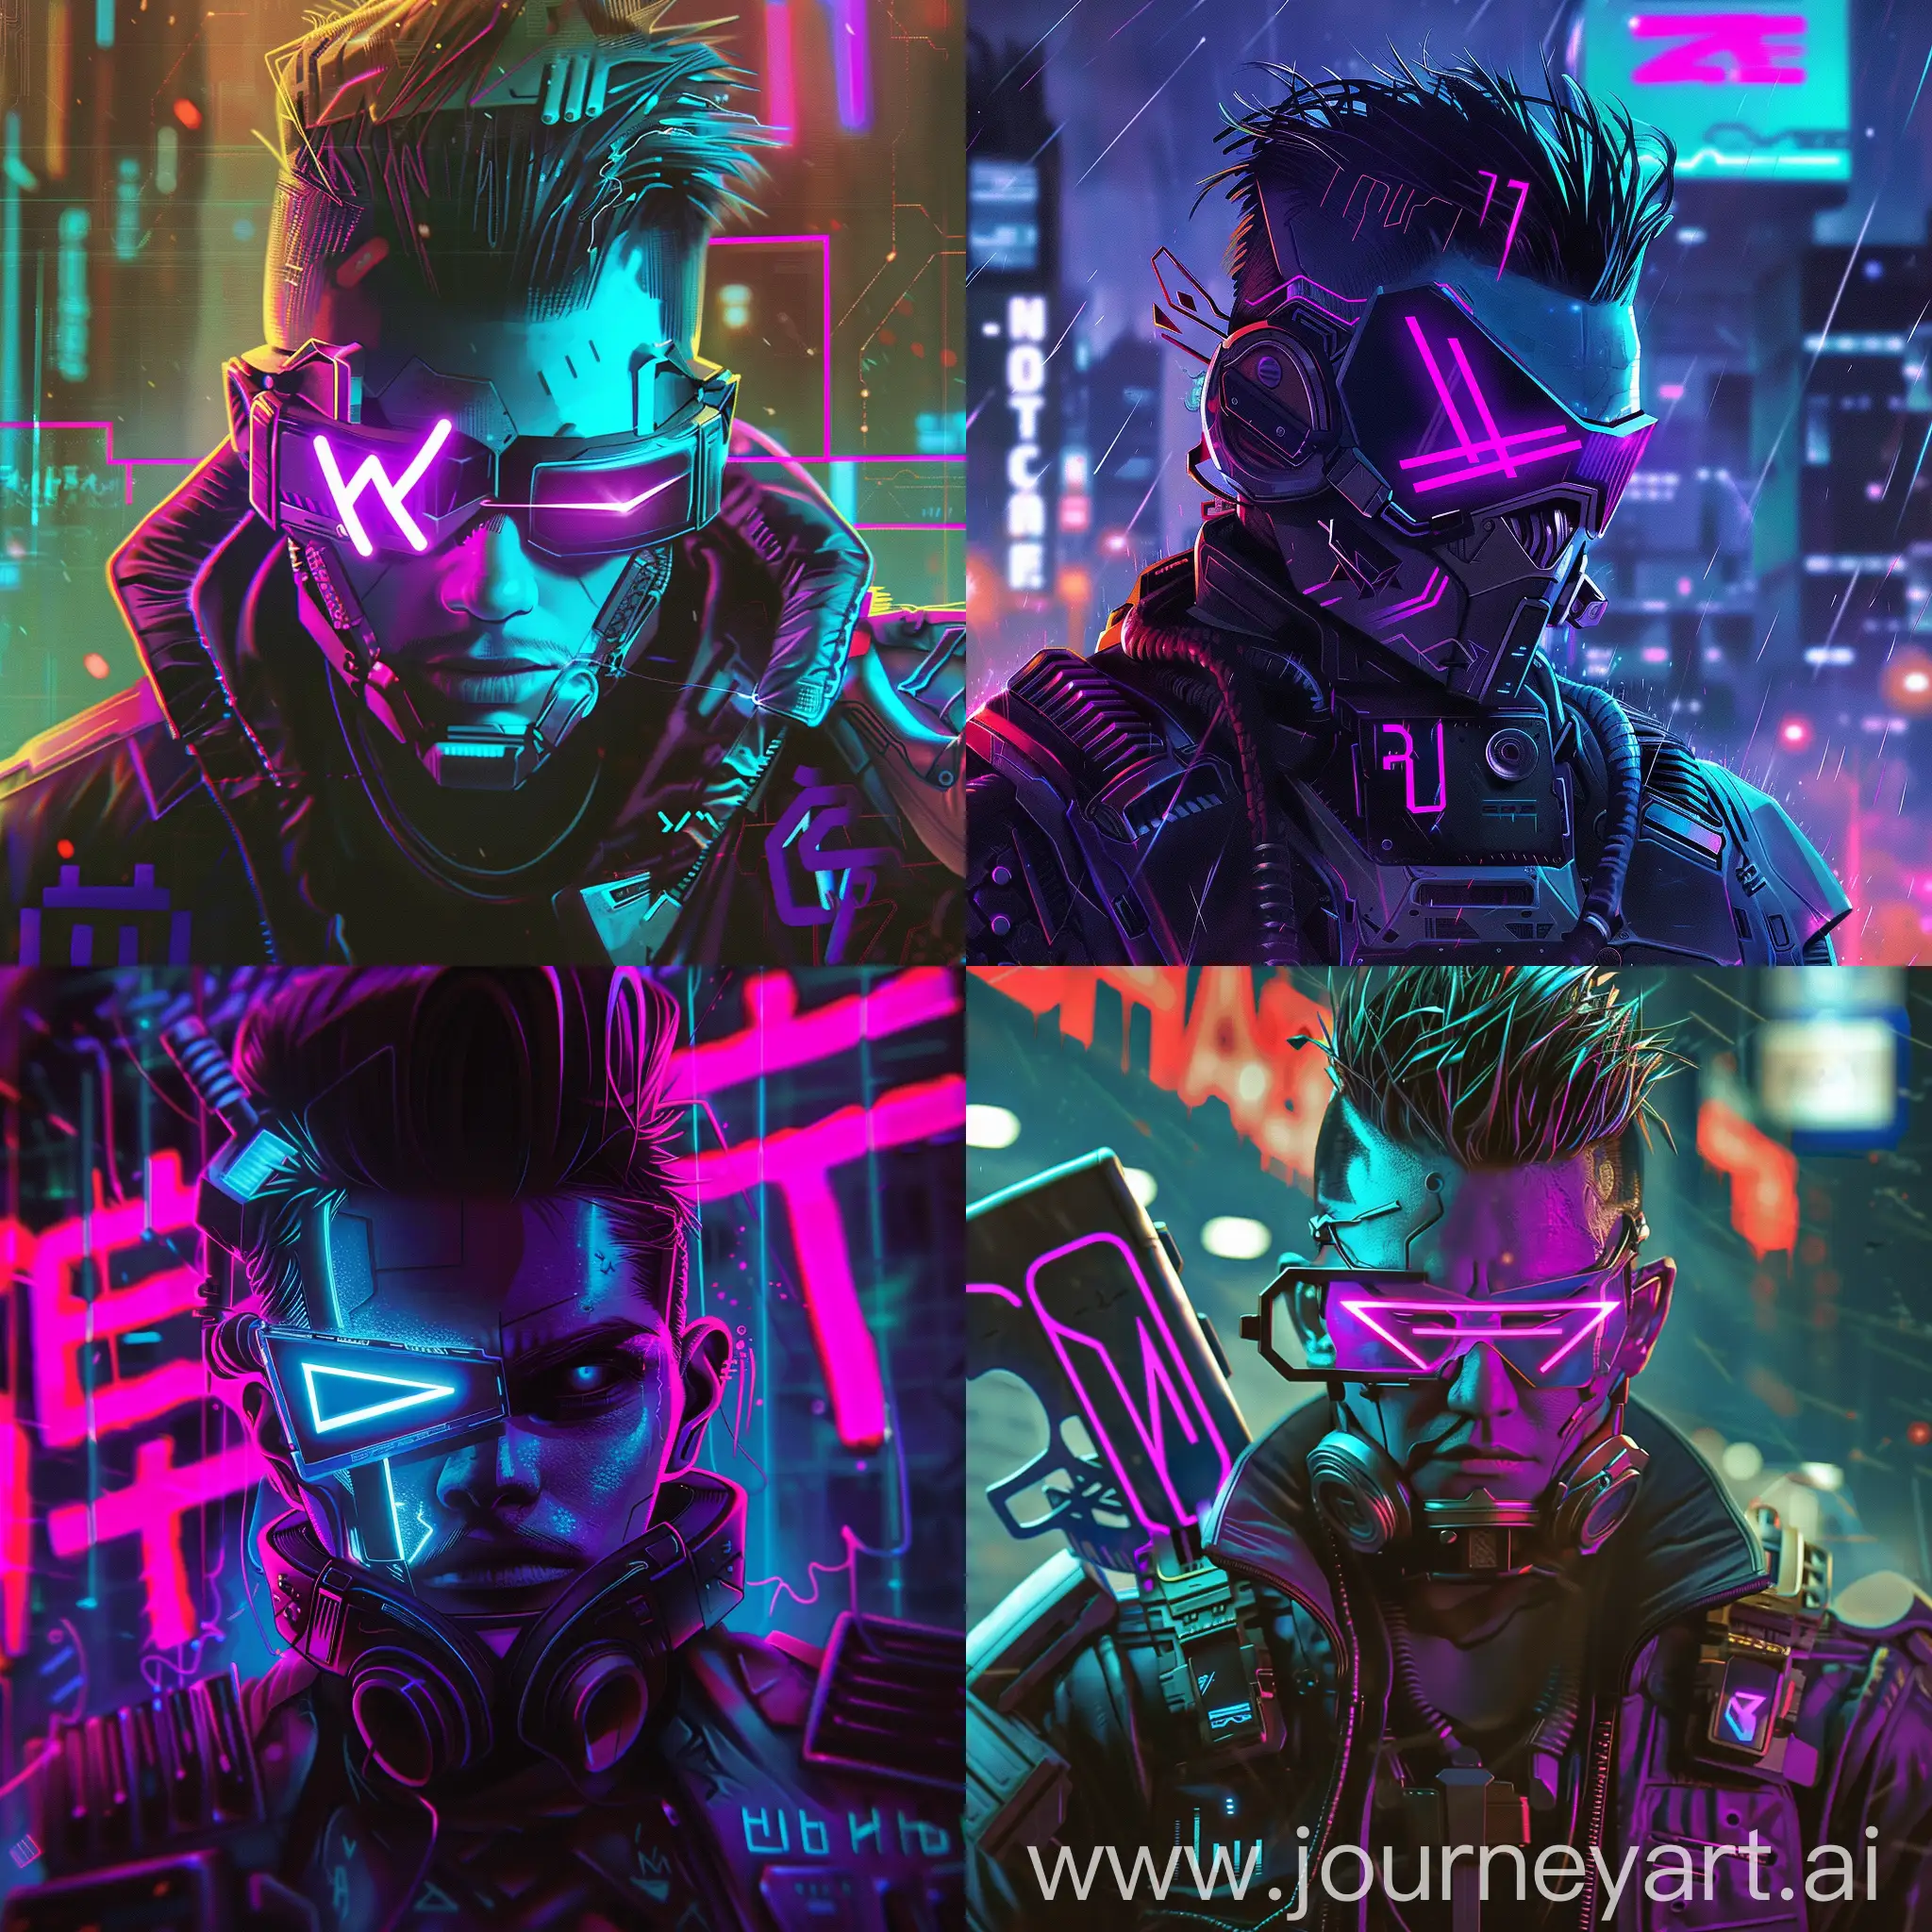 Futuristic-Cyberpunk-Portrait-with-Neon-Lights-and-Urban-Vibes